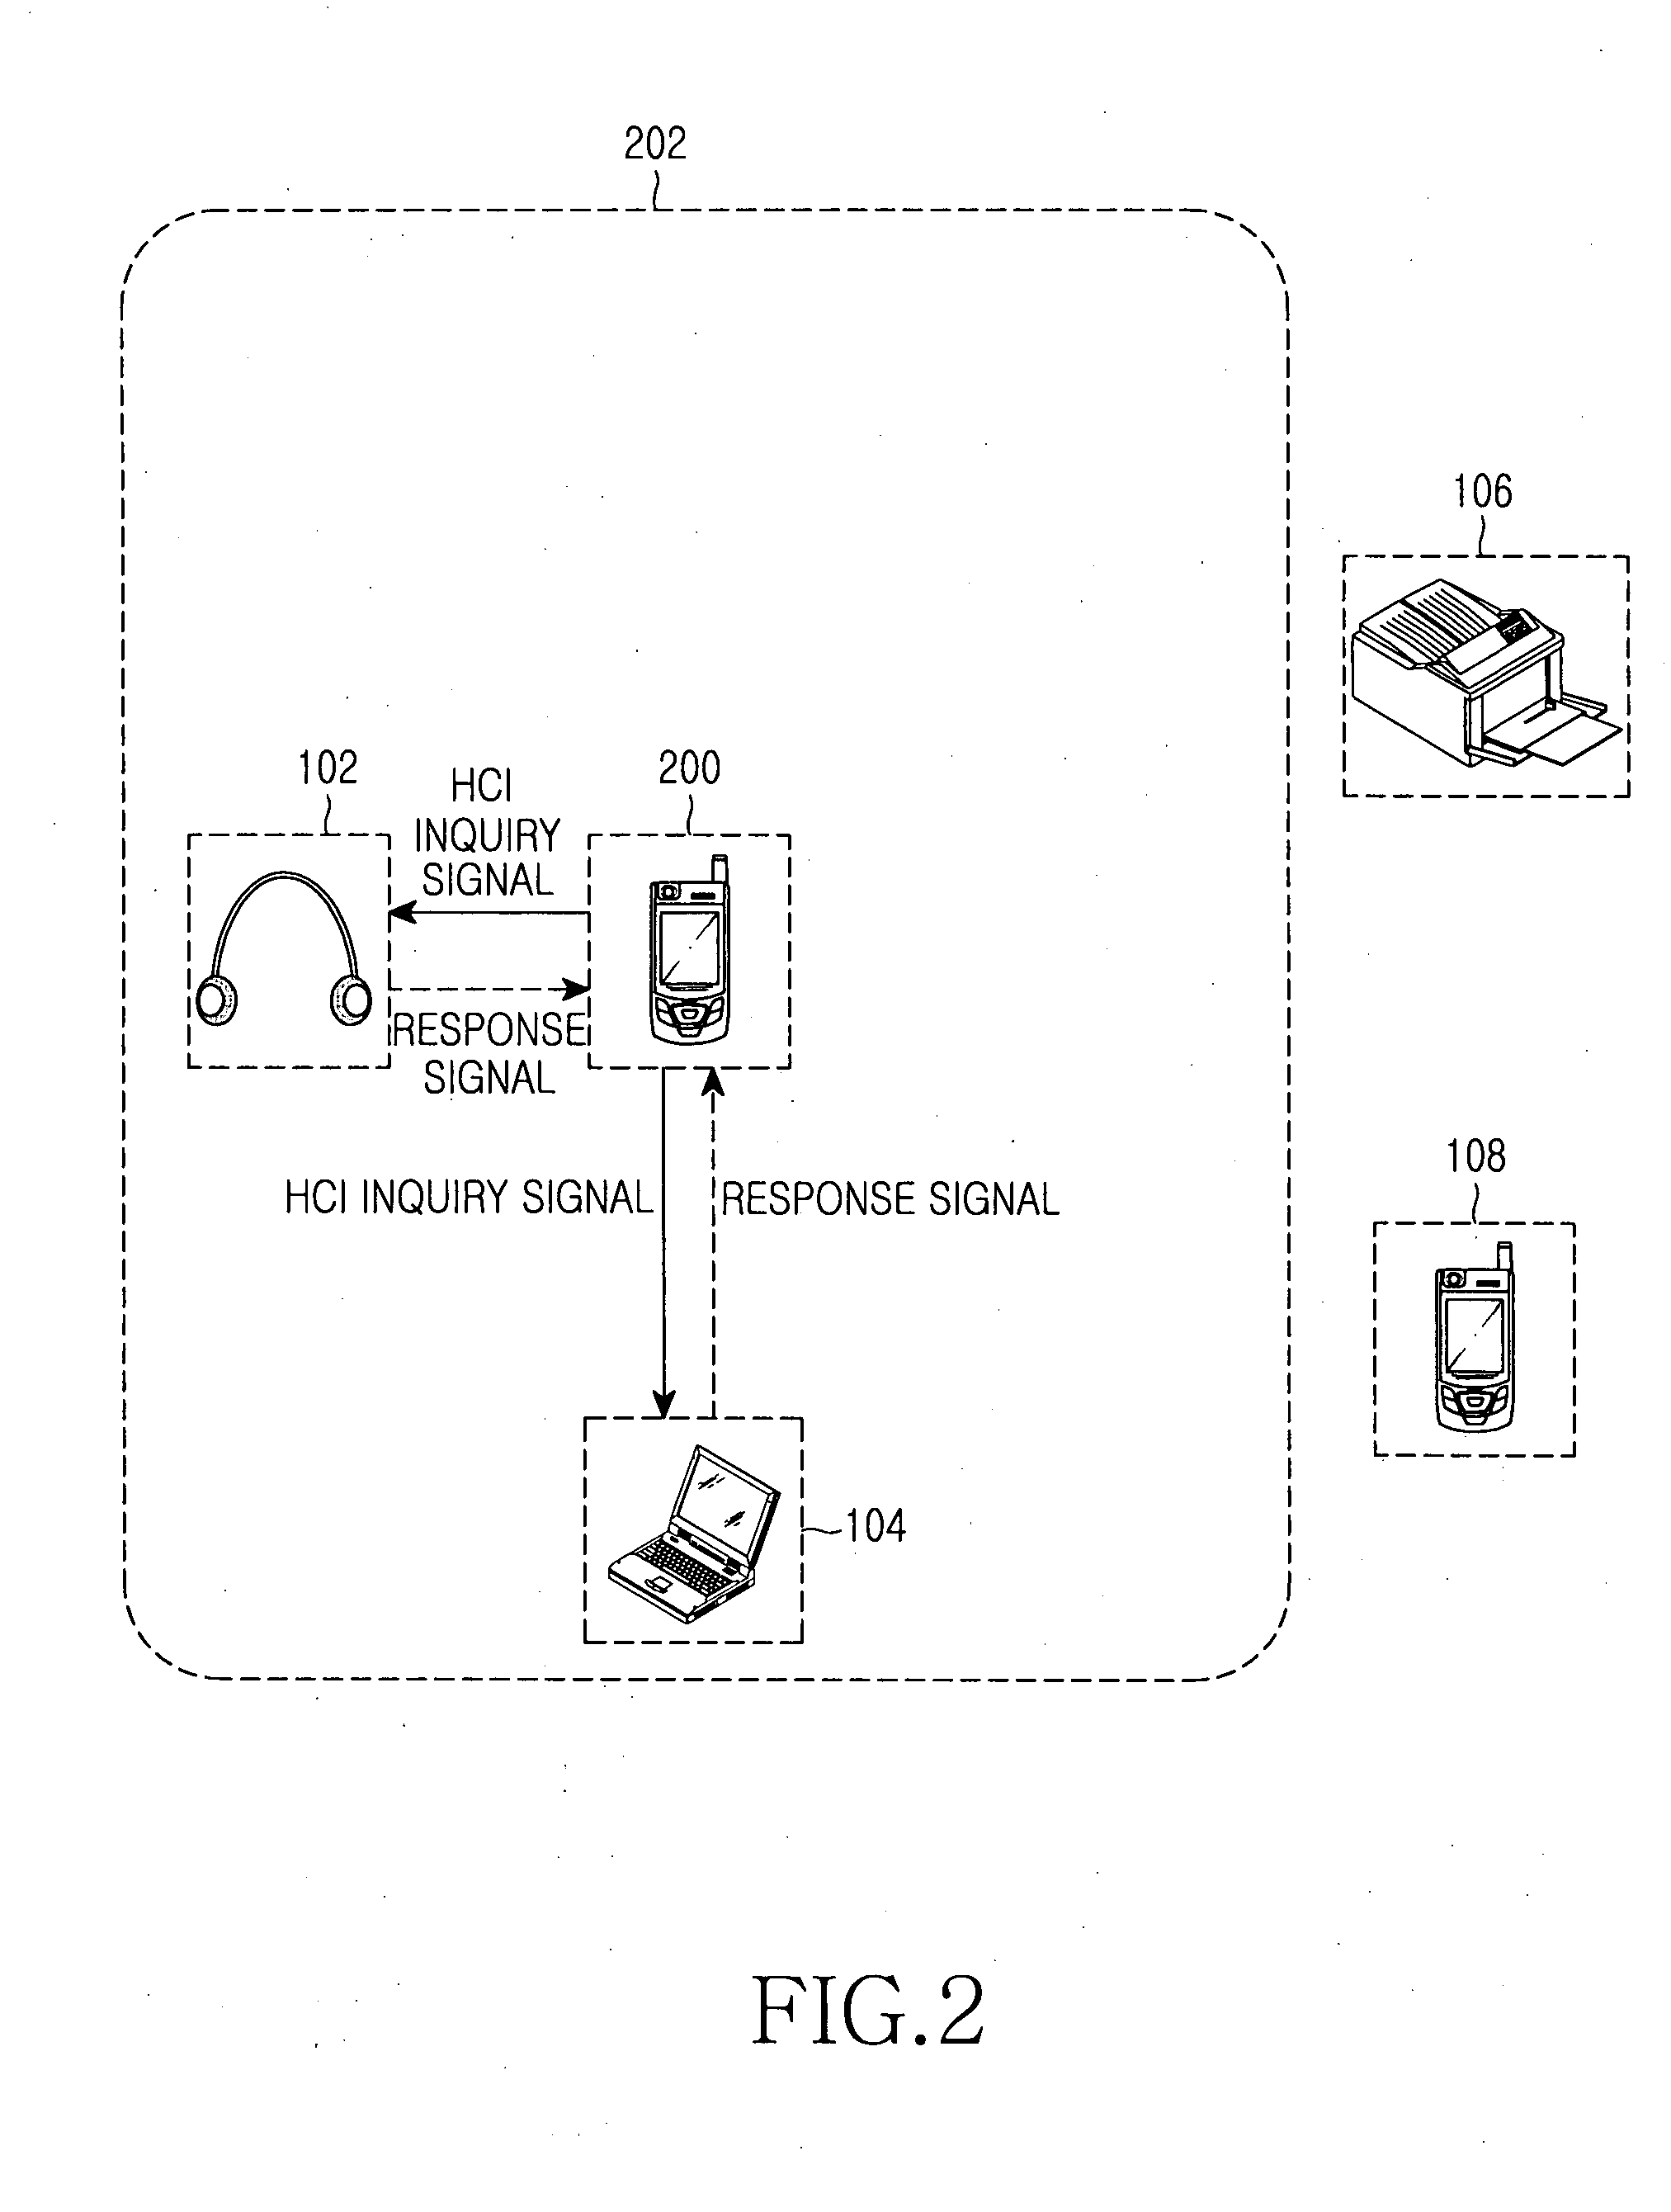 Device and method for searching for and connecting to bluetooth devices